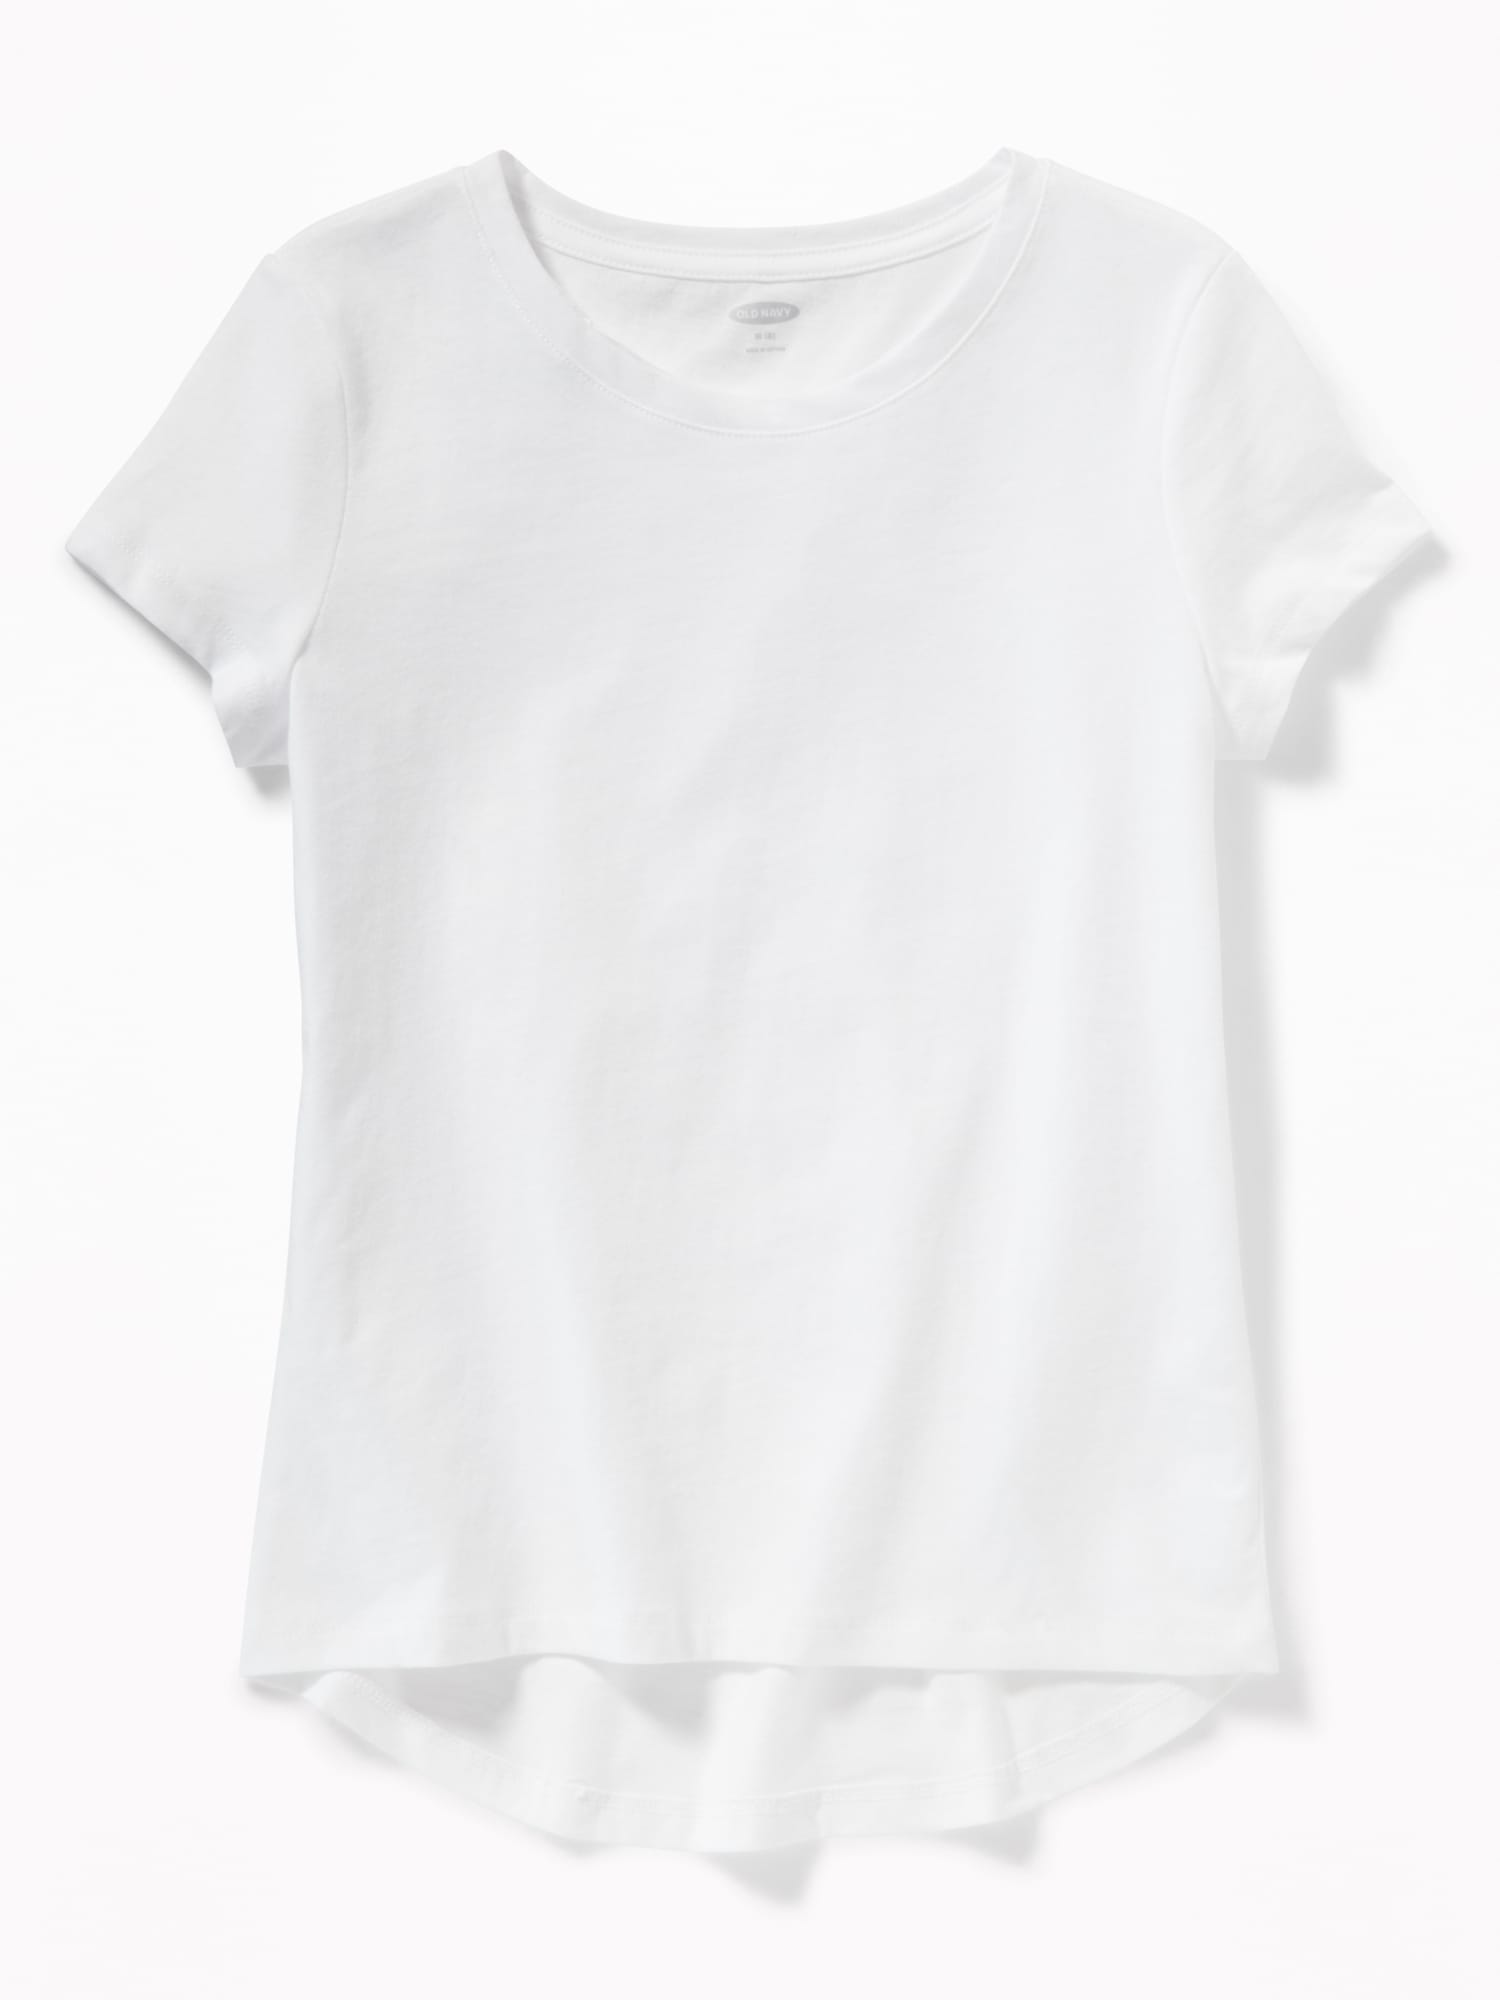 *Hot Deal* Softest Crew-Neck Tee for Girls